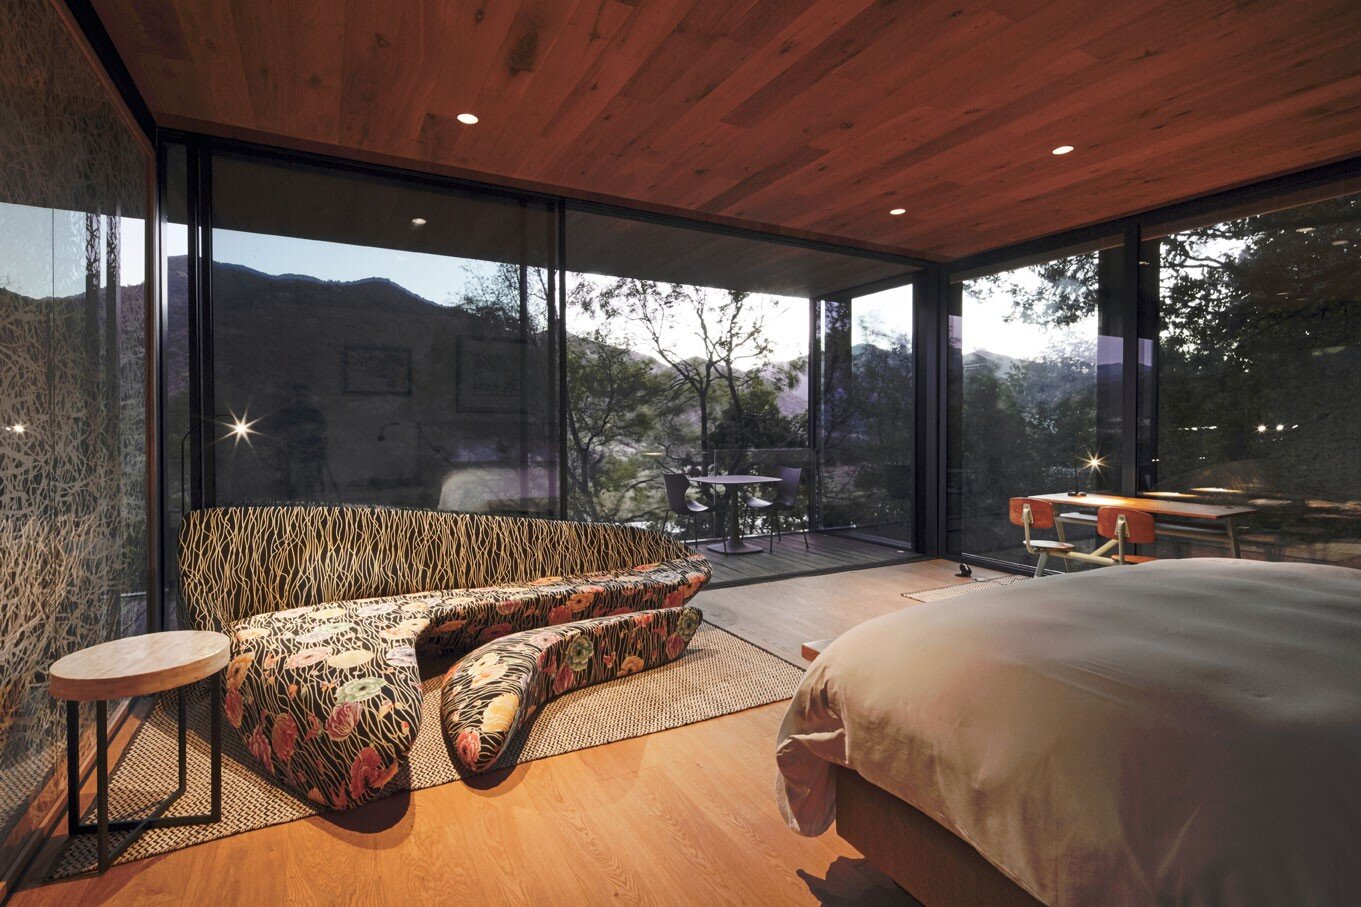 Boho Pop Suite at Puro Vik Retreat in Chile - Glass-walled houses on cliffs overlooking the Millahue Valley